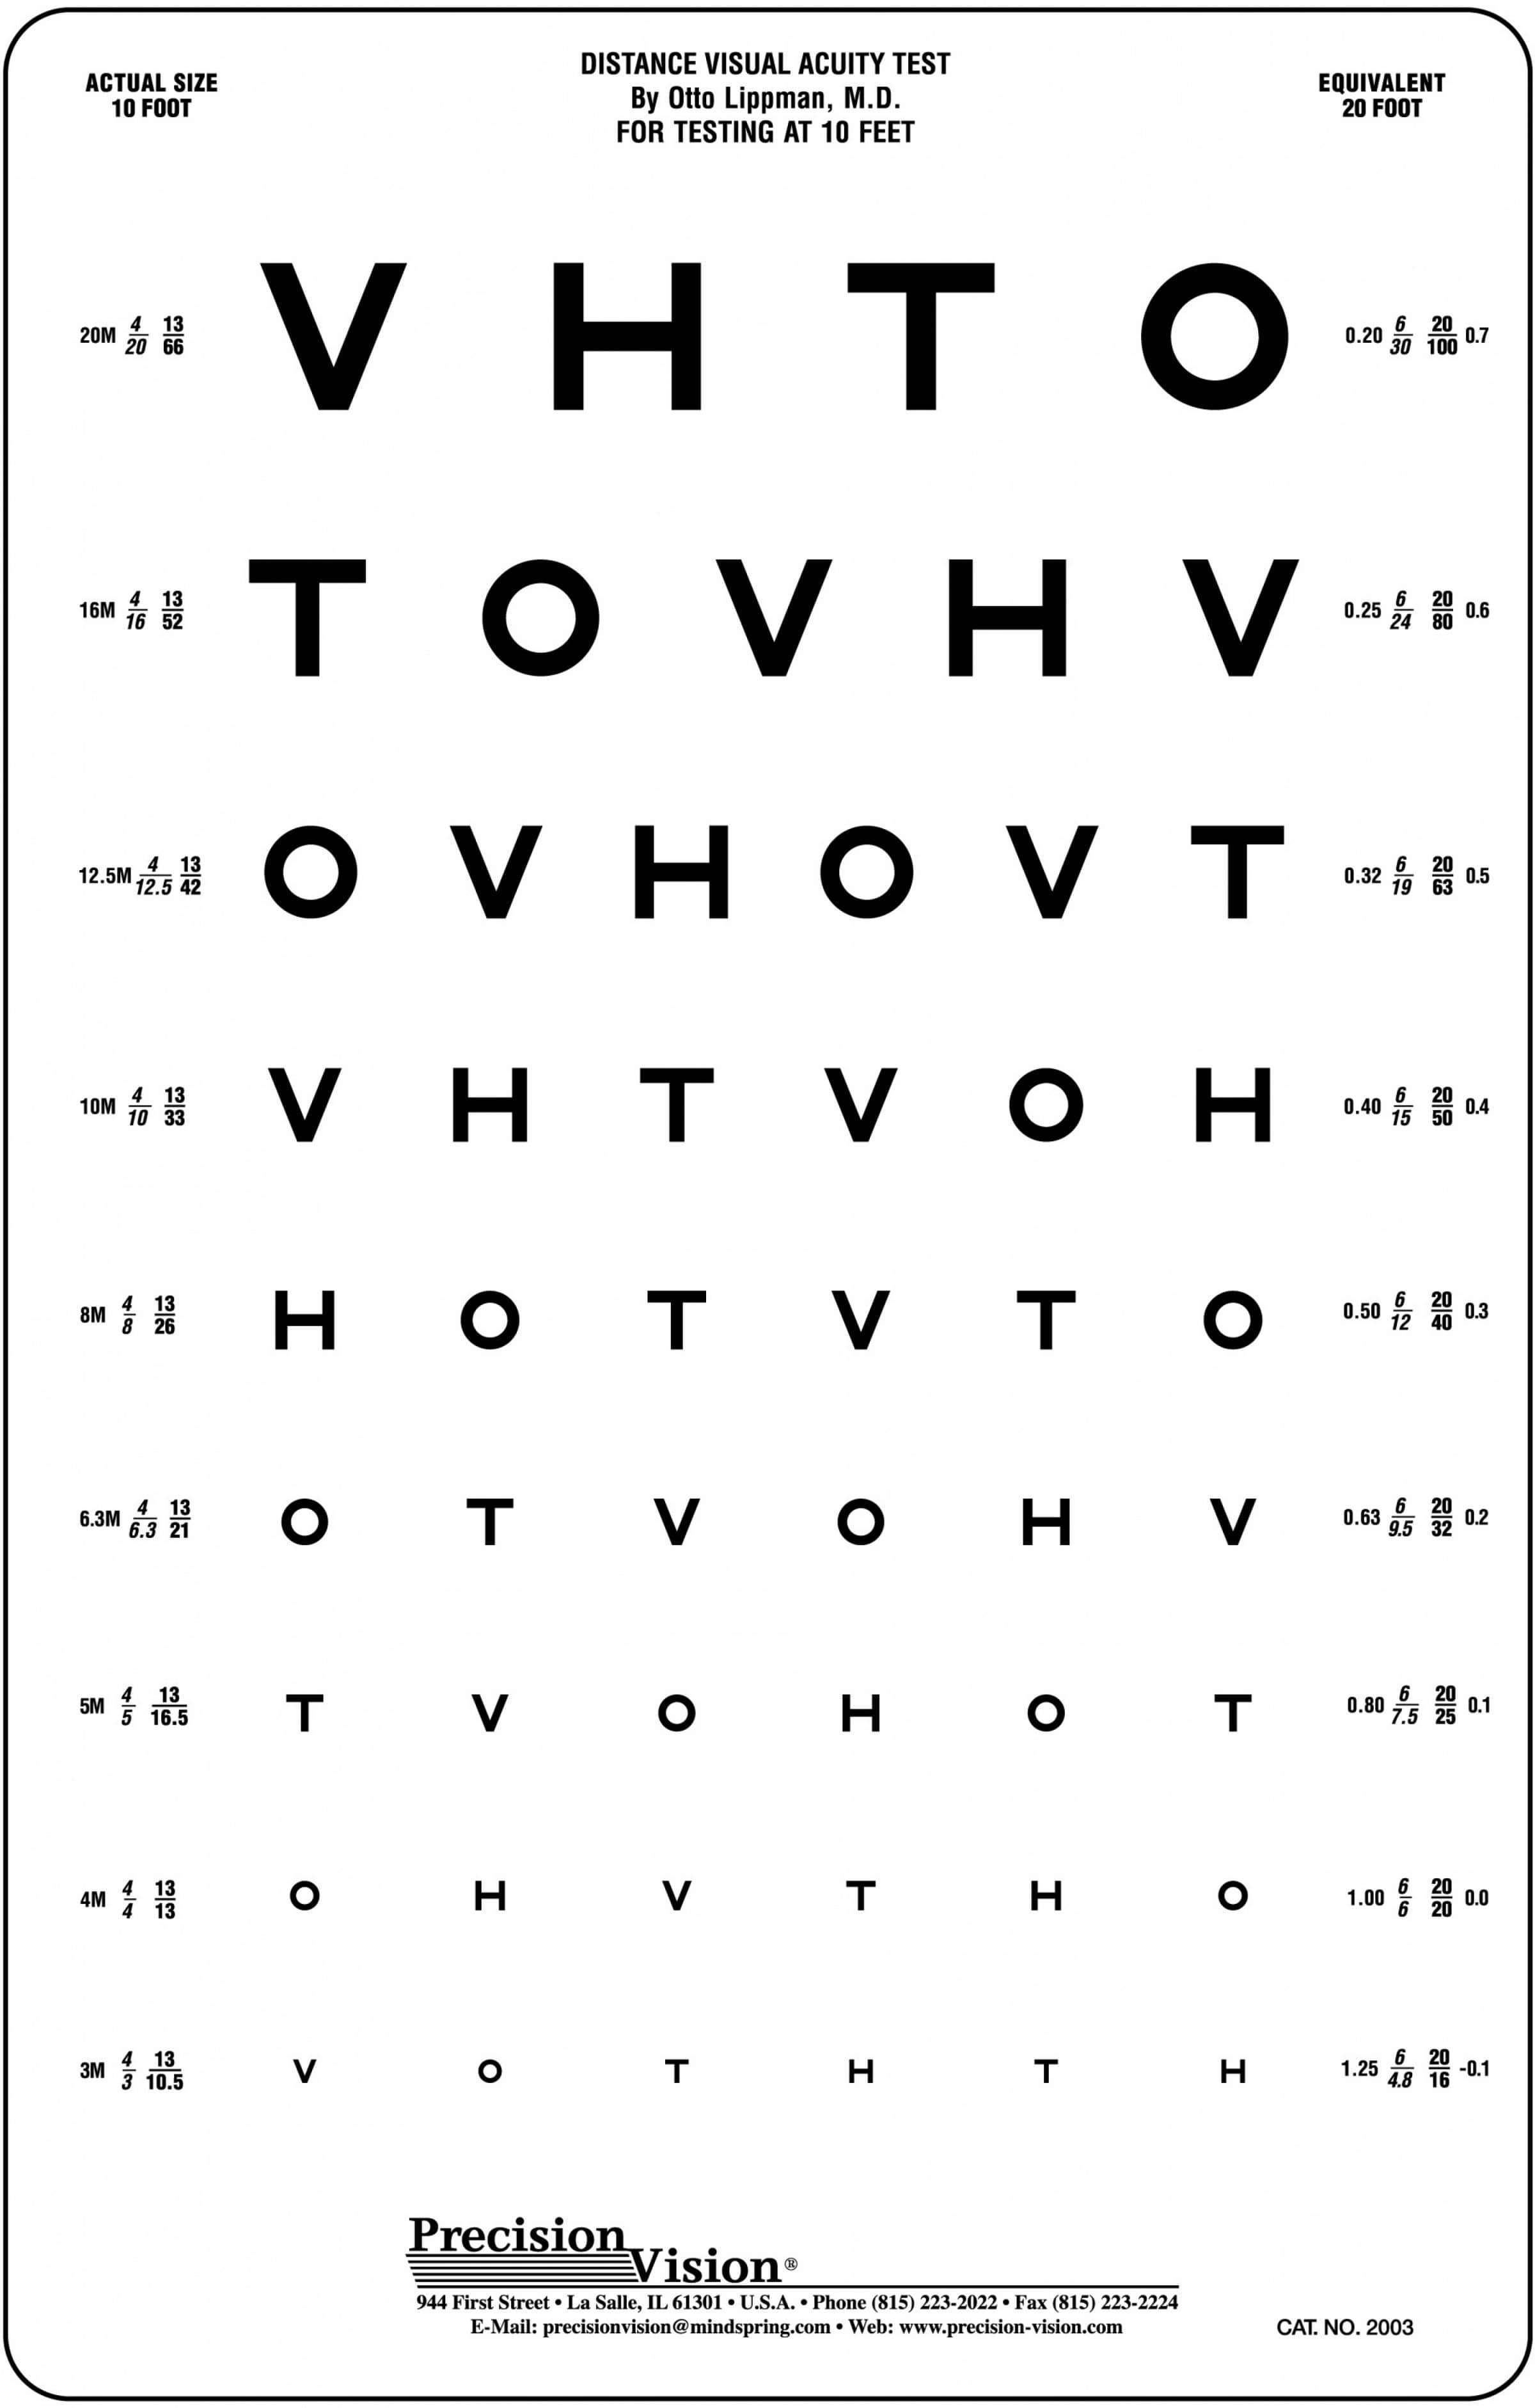 Vision Acuity Chart